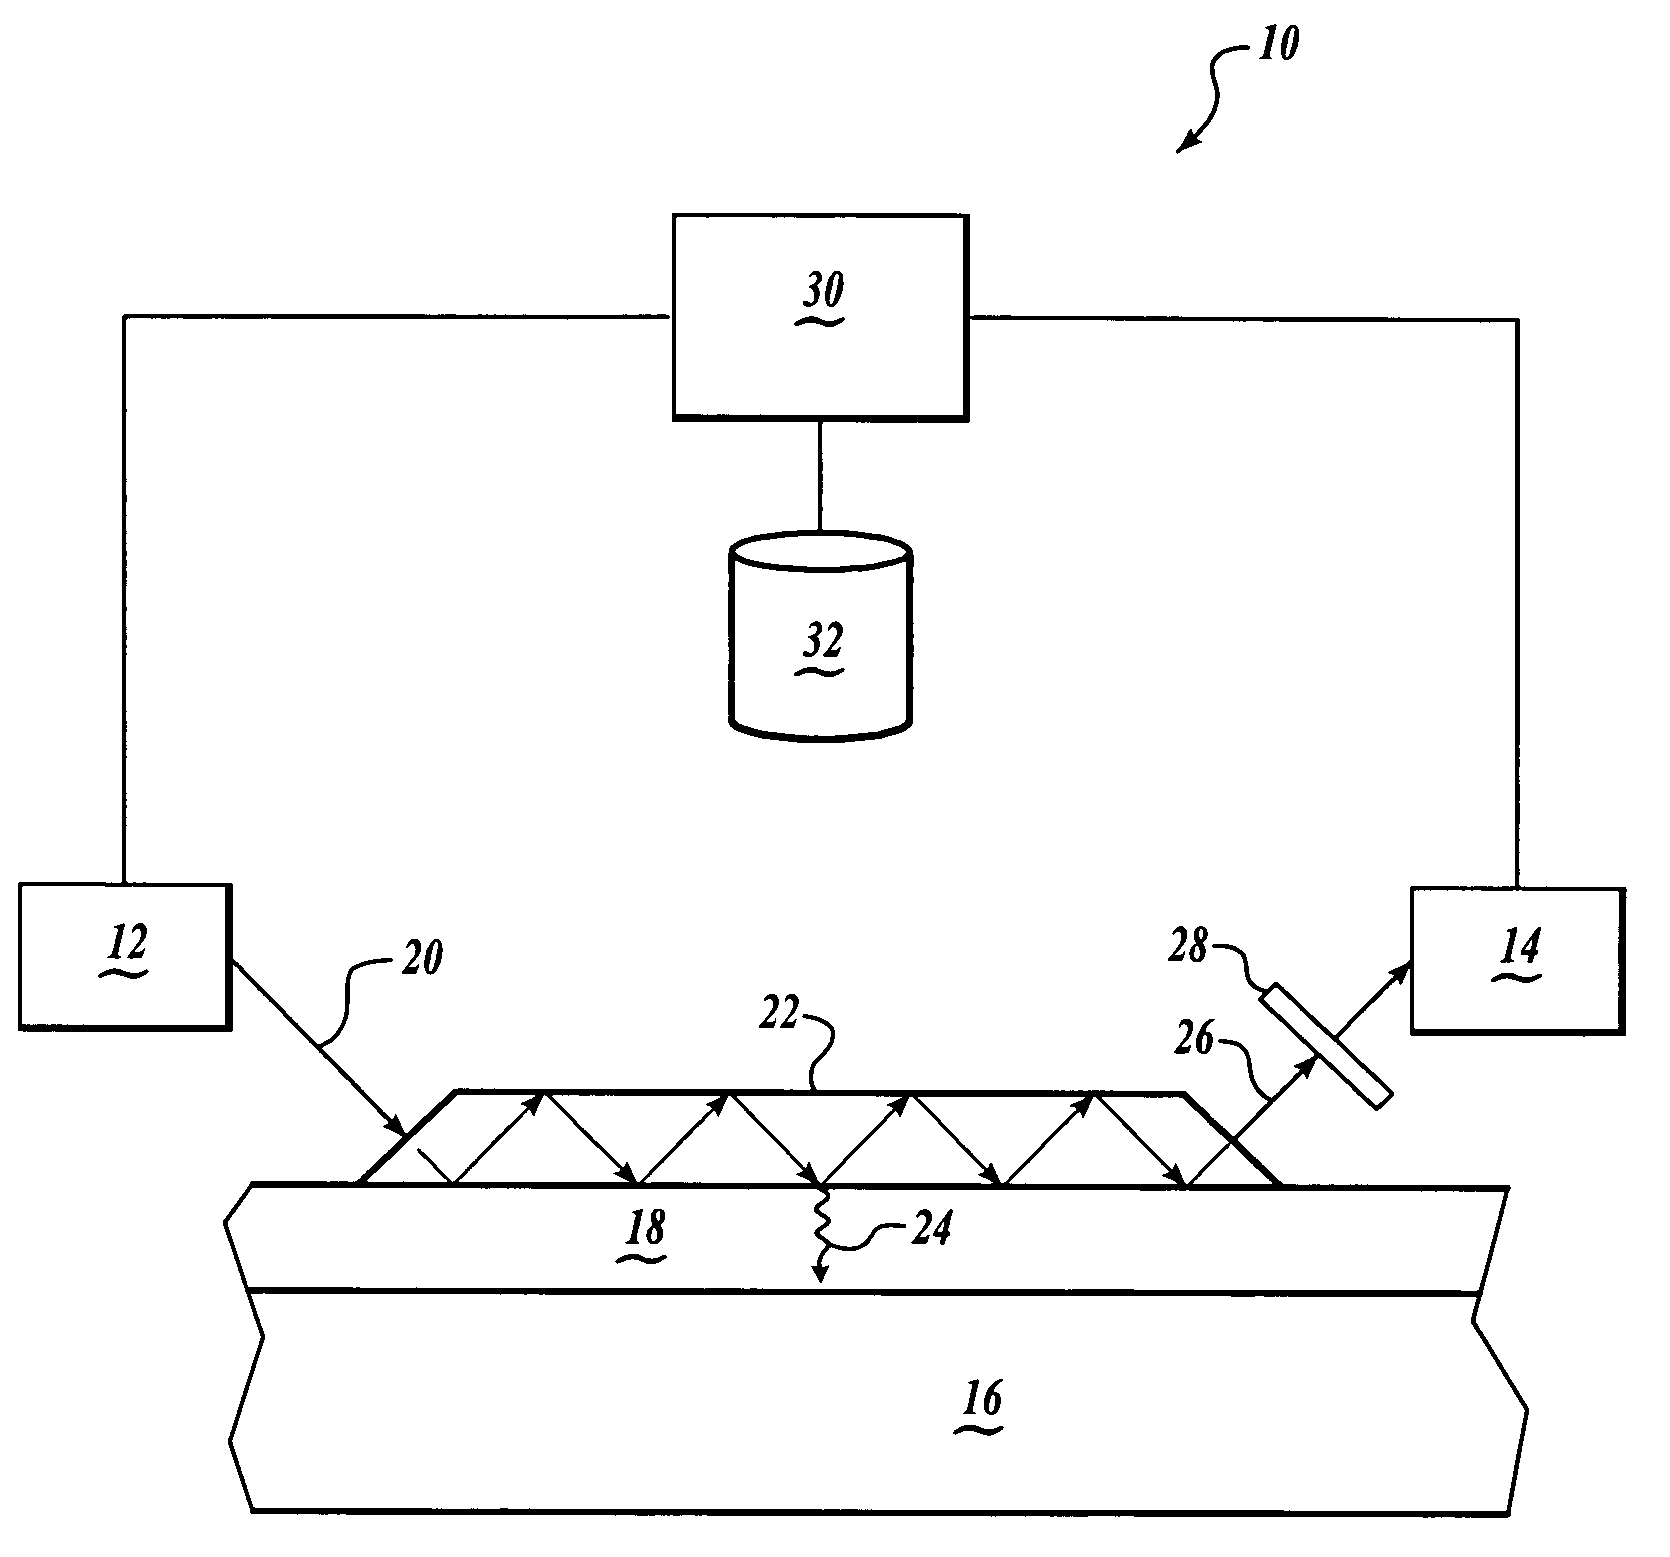 Apparatus and methods of determining chemical properties of a resin-based material using infrared absorbance